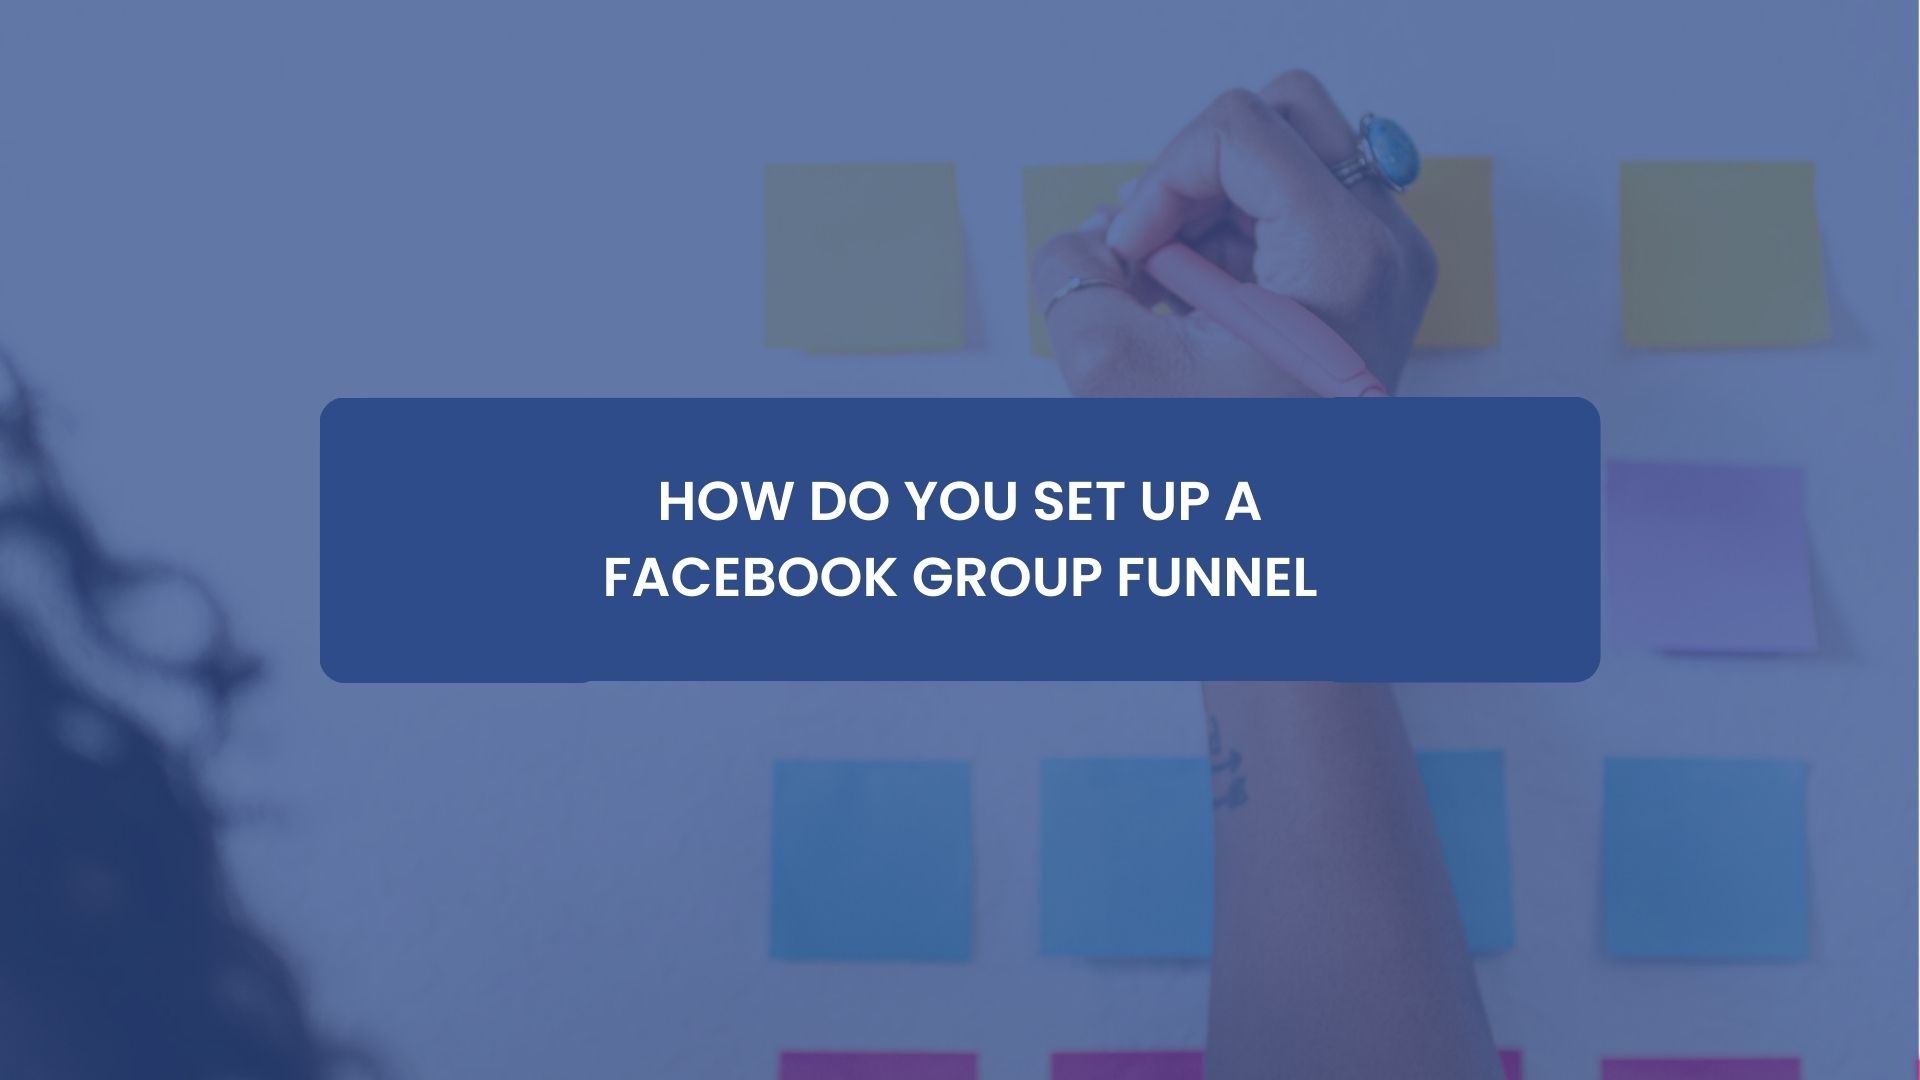 How do you set up a Facebook Group Funnel